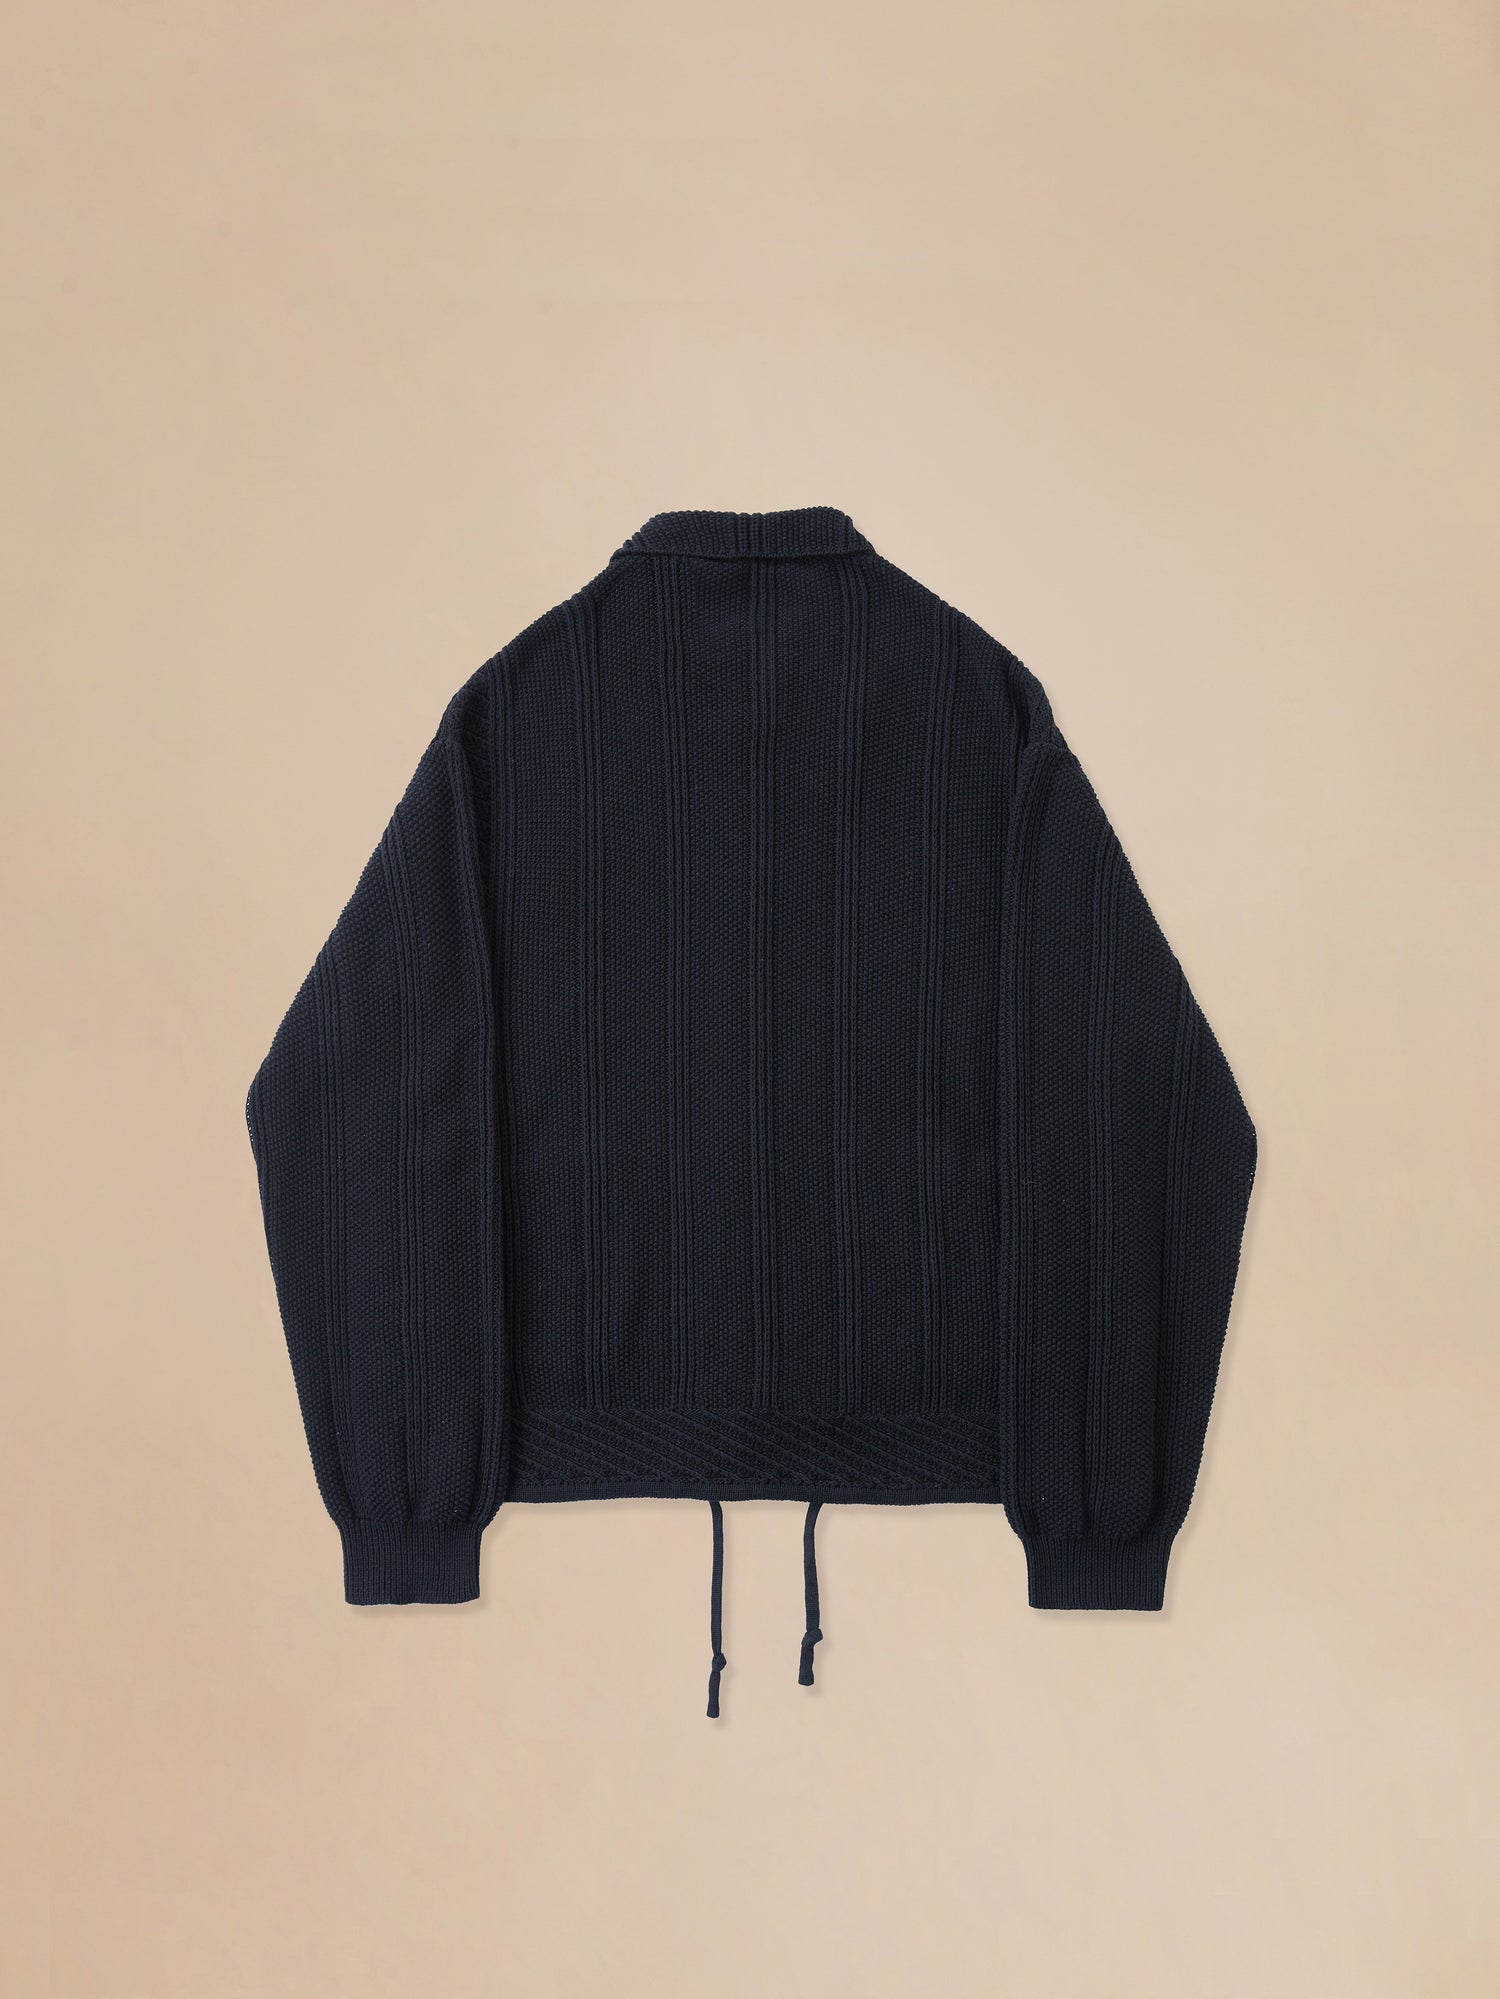 A Found Zip Up Panel Knit Ribbed Sweater on a beige background.